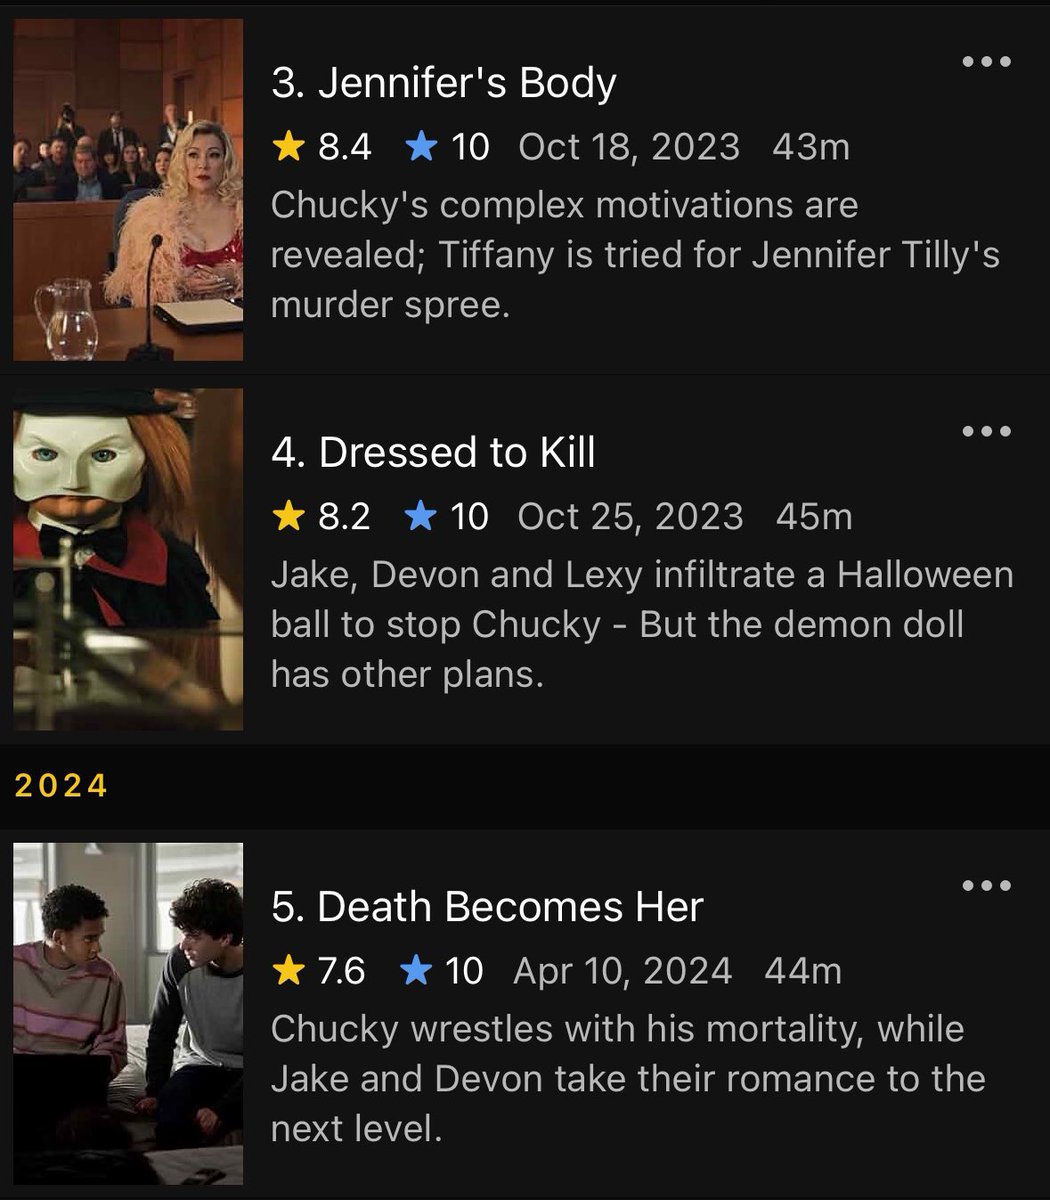 chucky season 3 of officially the best reviewed season on IMDB as of now 🔪 #chucky